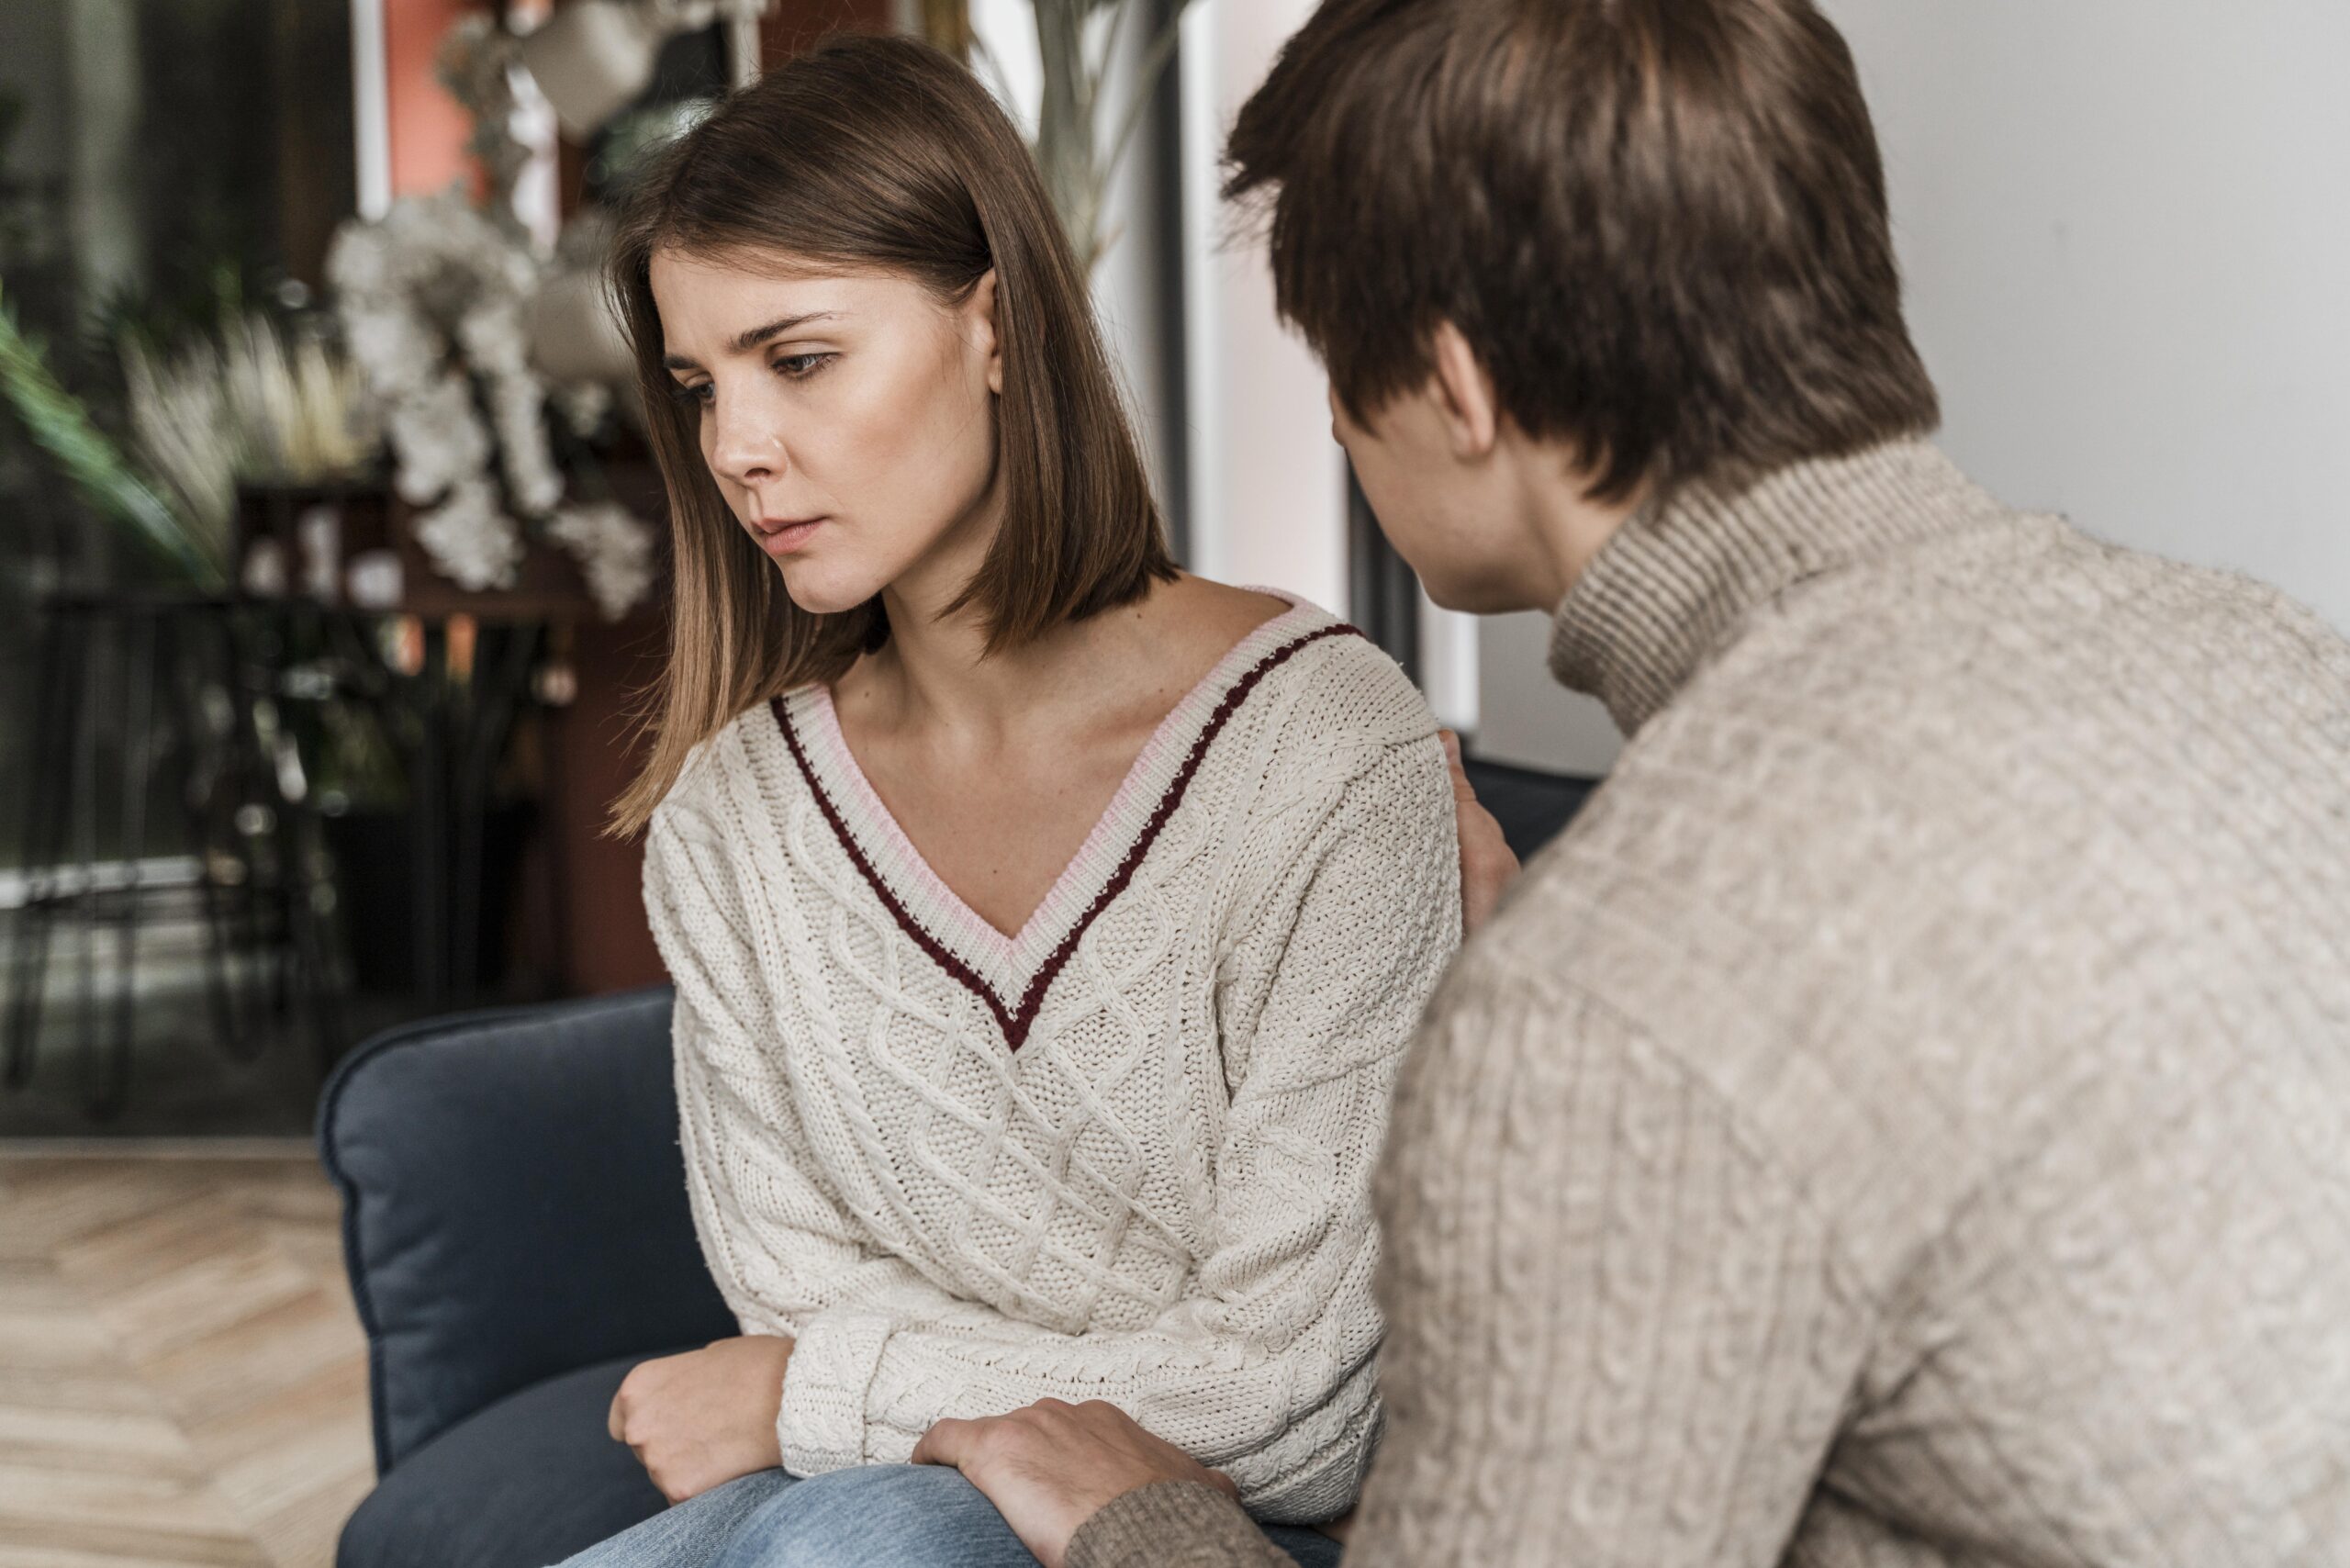 Discover how to identify and support your partner through trauma. Our guide covers the five key signs to watch for in your relationship. #TraumaAwareness #SupportivePartnership #HealthyRelationships #EmotionalHealing #UnderstandingTrauma